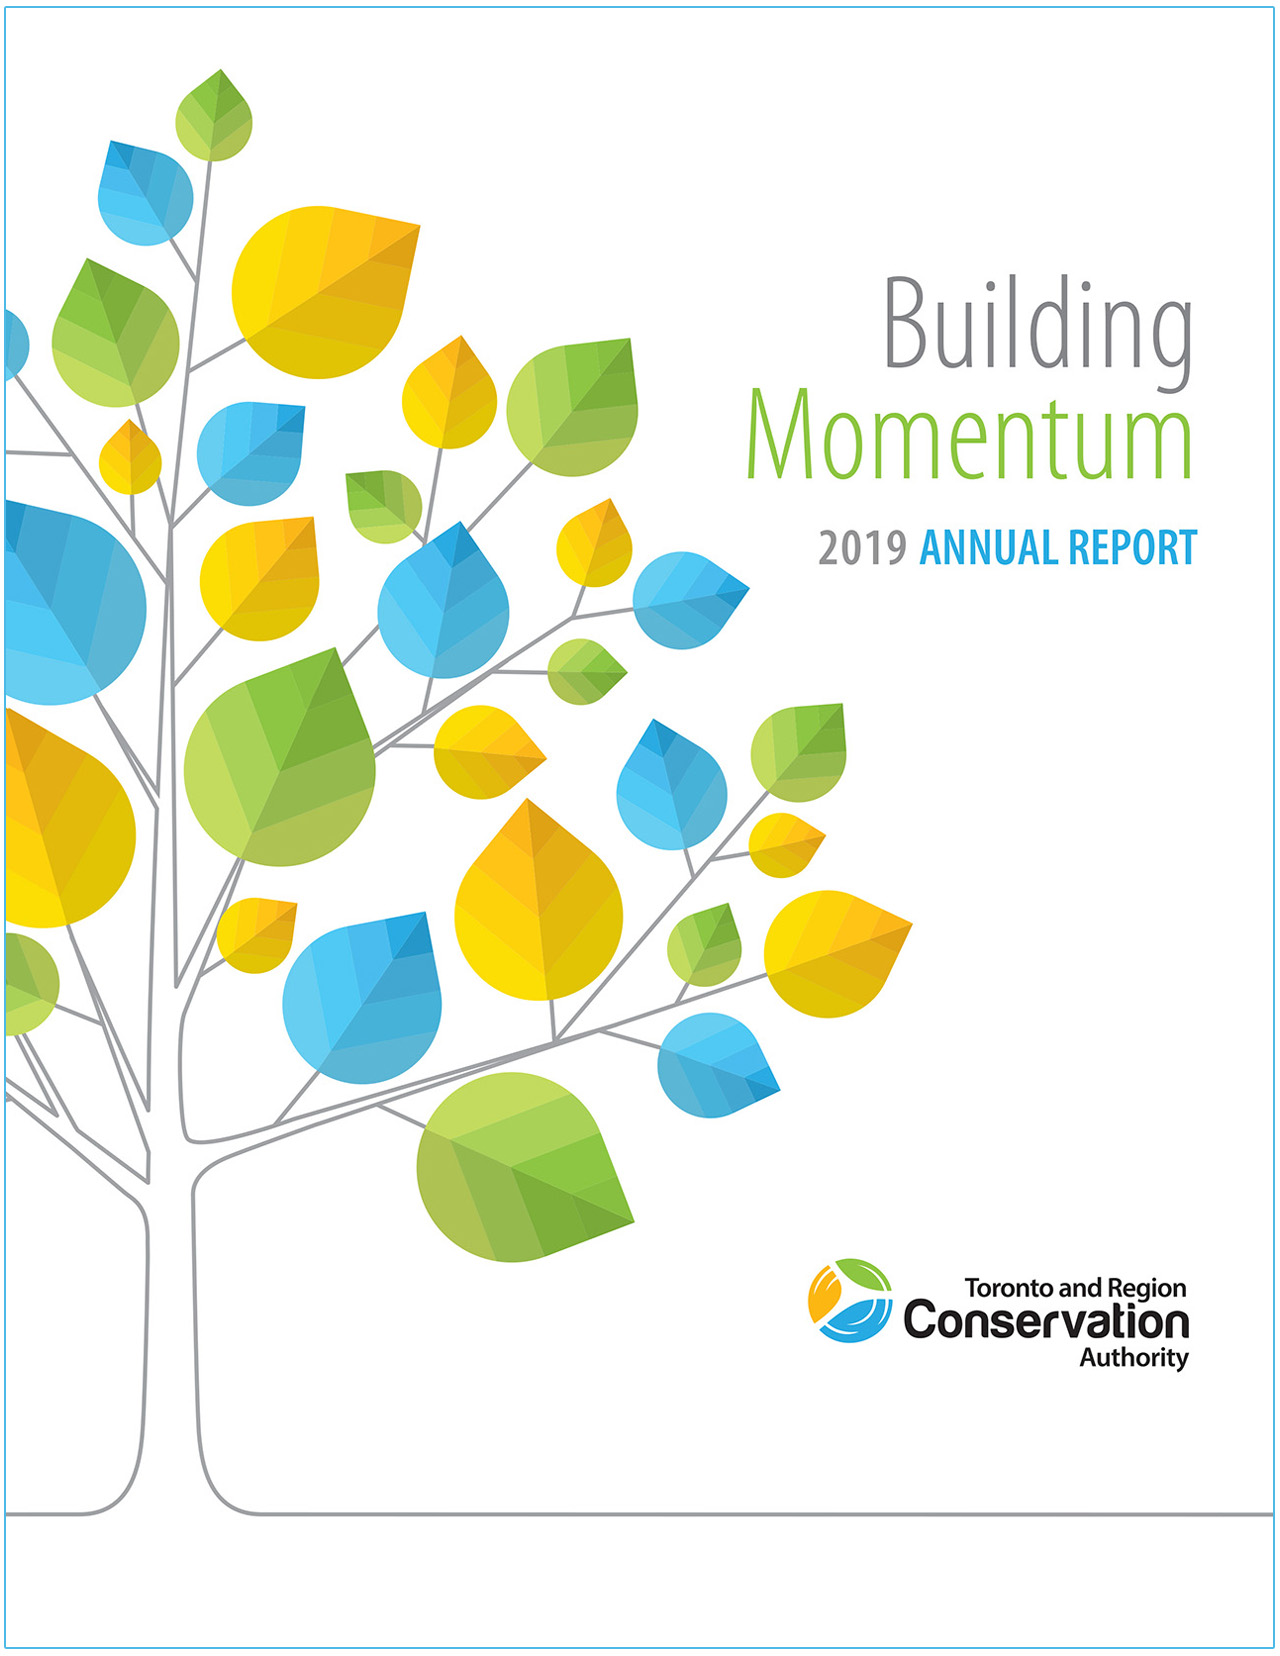 cover page of TRCA 2019 annual report